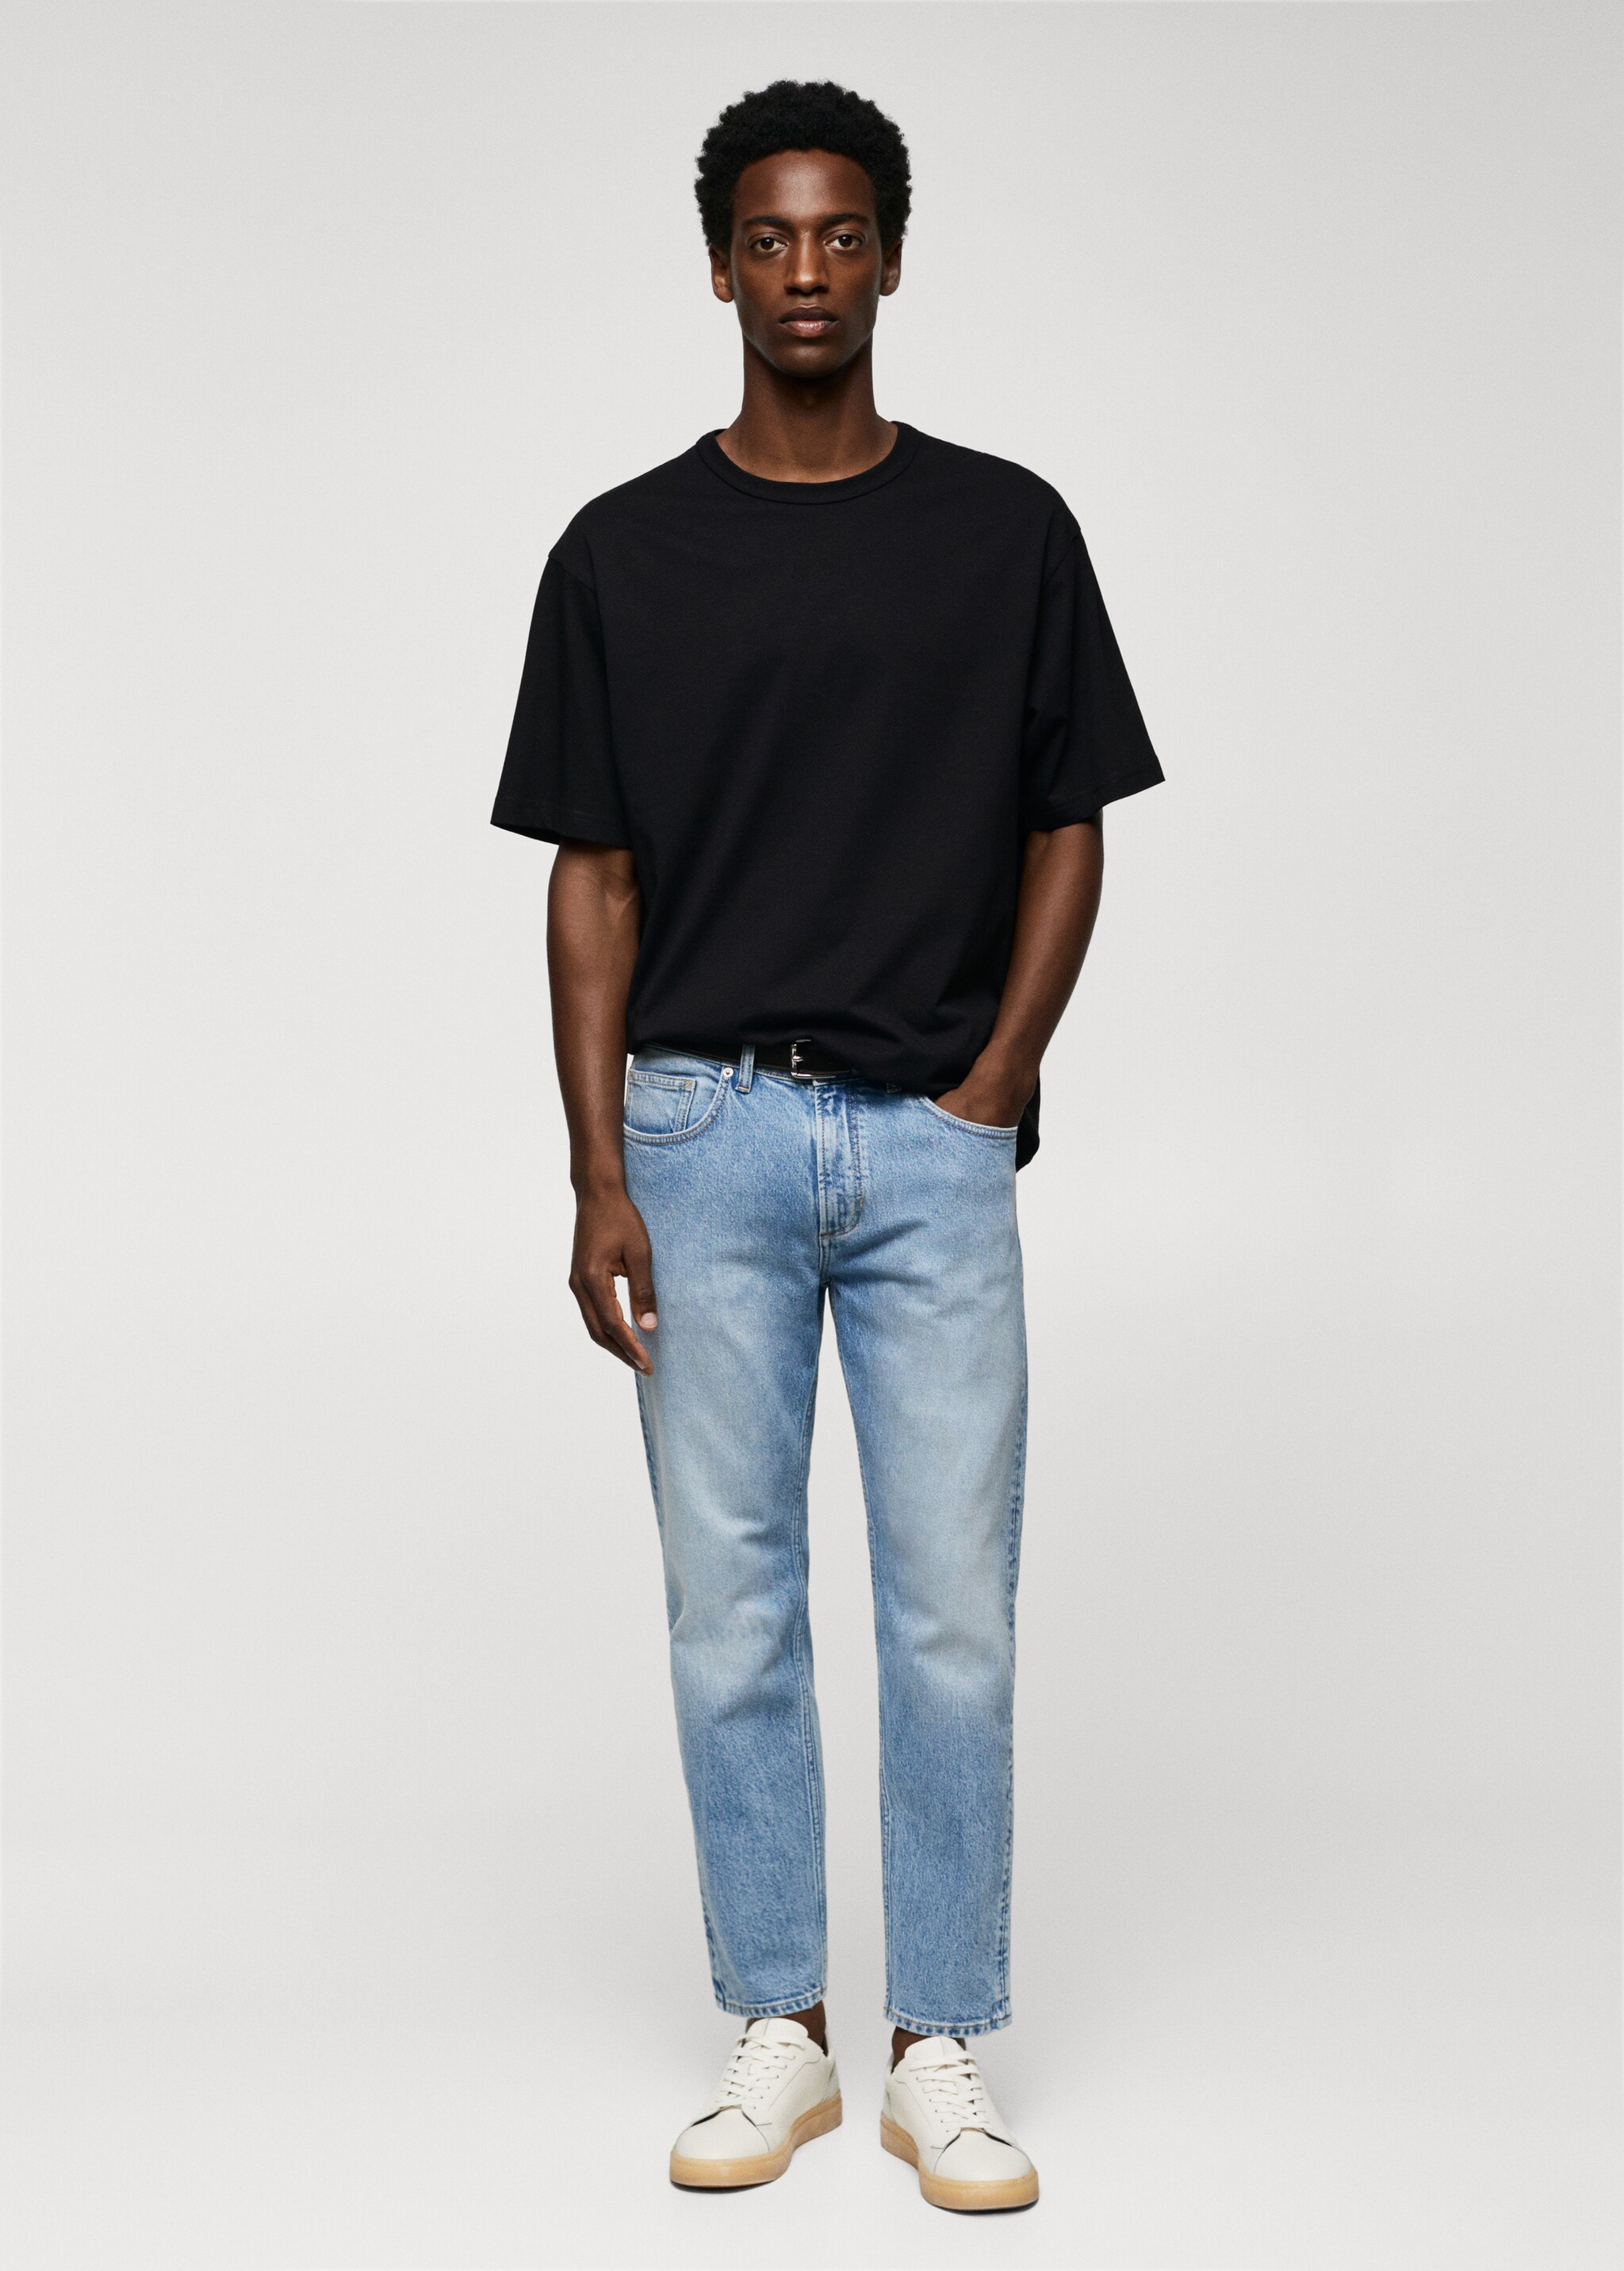 Ben tapered cropped jeans - General plane